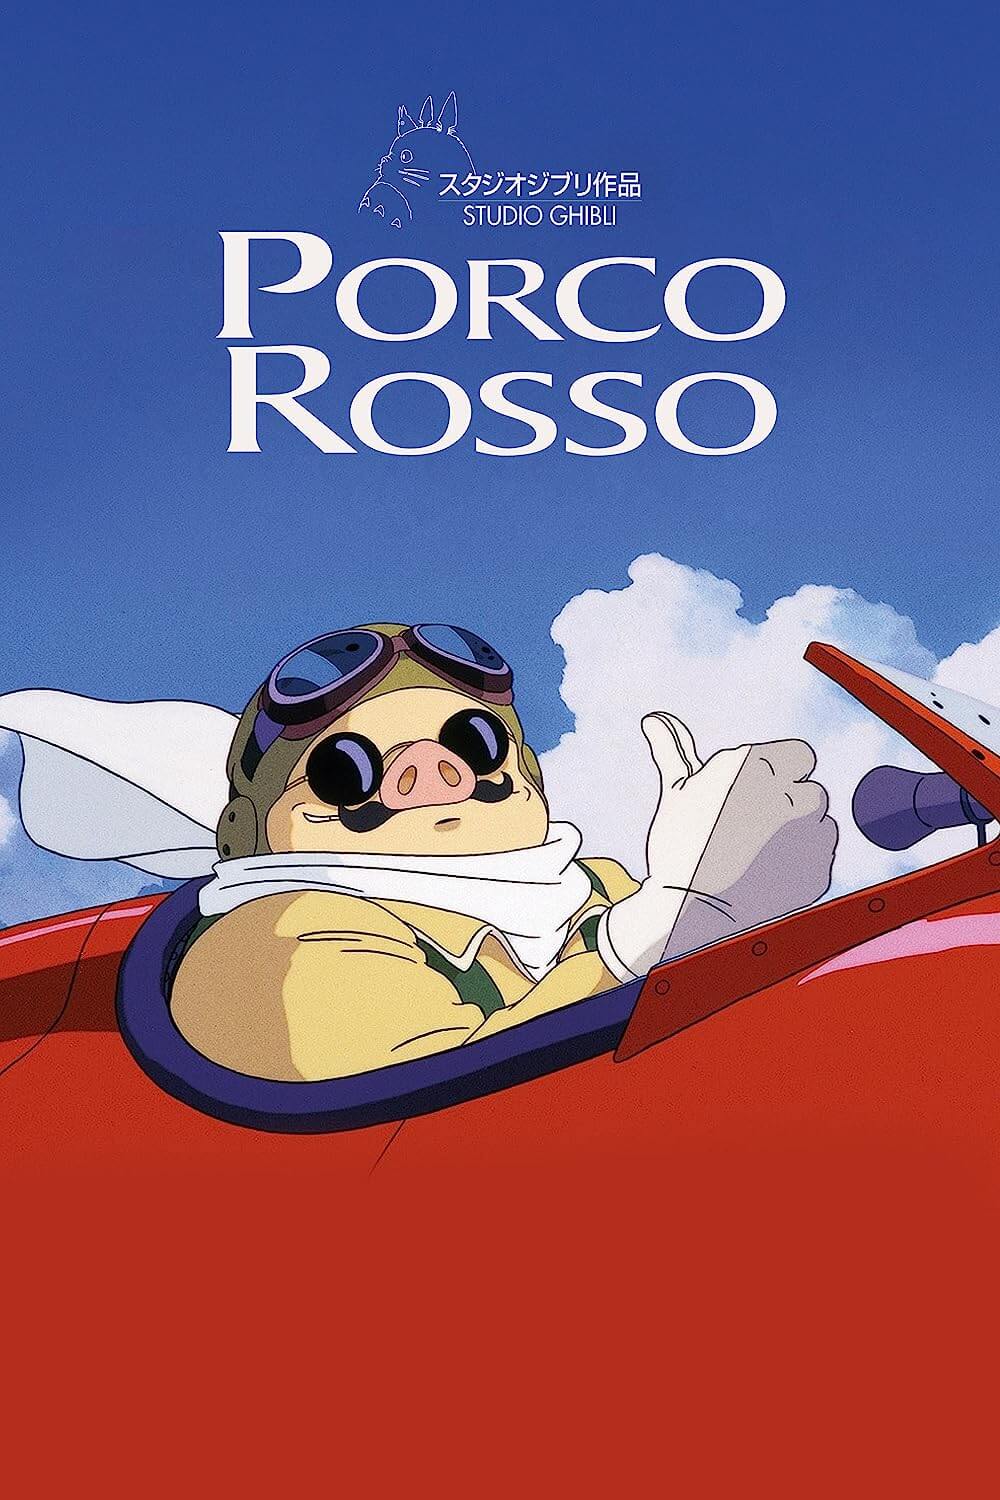 Watch Porco Rosso today, it's one of the best Studio Ghibli movies. Perfect for 10+ year olds.